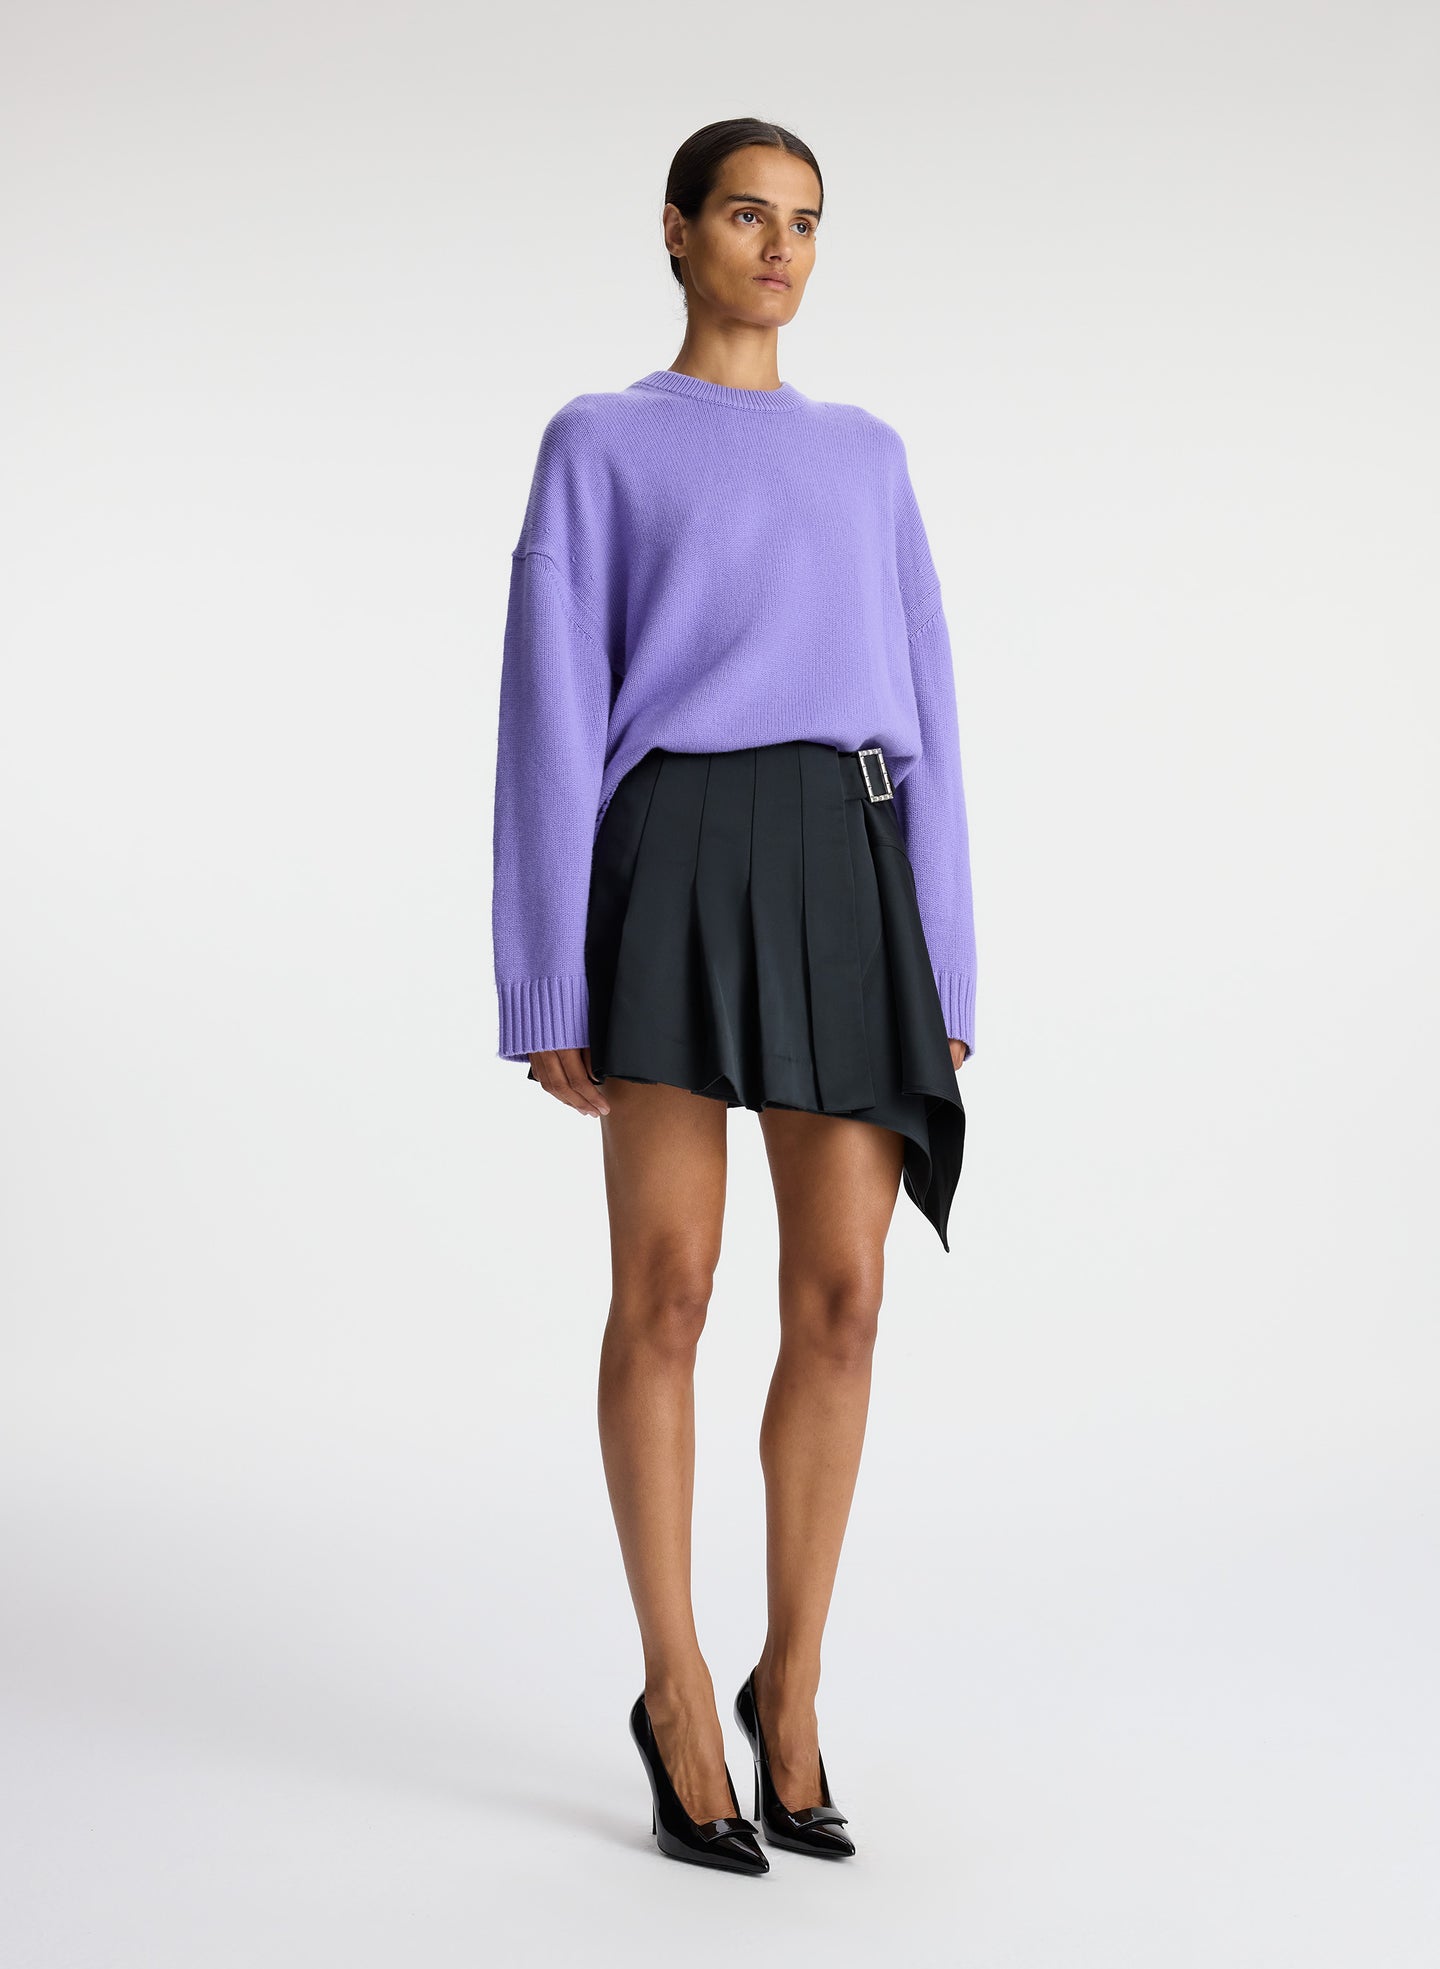 side view of woman wearing purple sweater and black pleated mini skirt